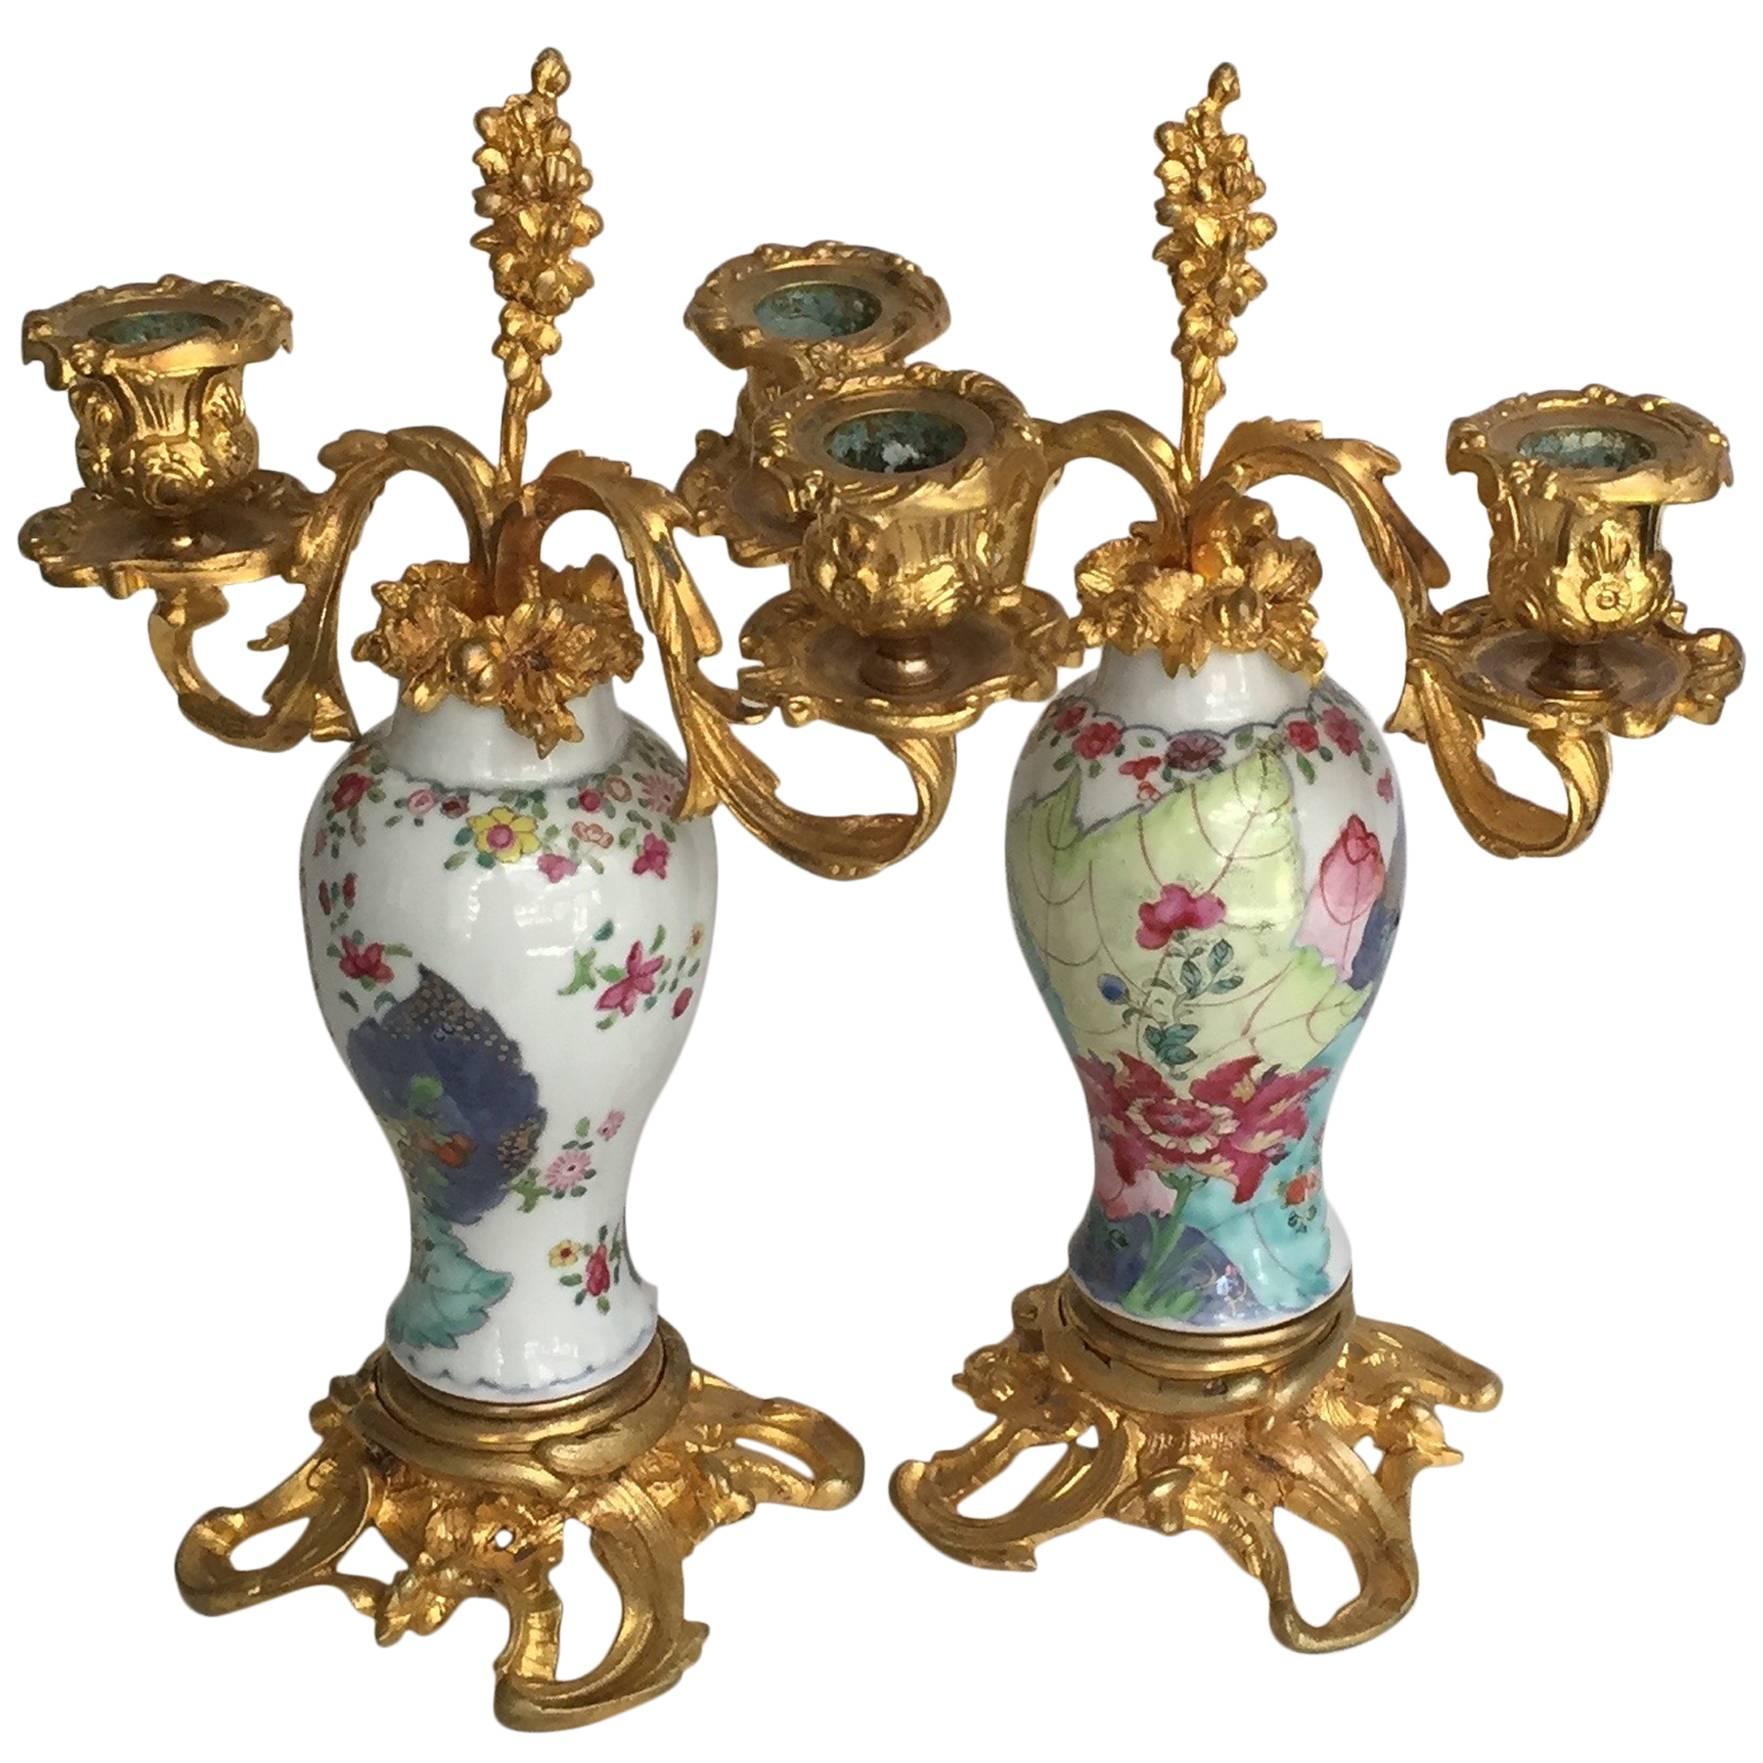 Chinese Export Porcelain and Ormolu-Mounted Two-Arm Candelabra For Sale